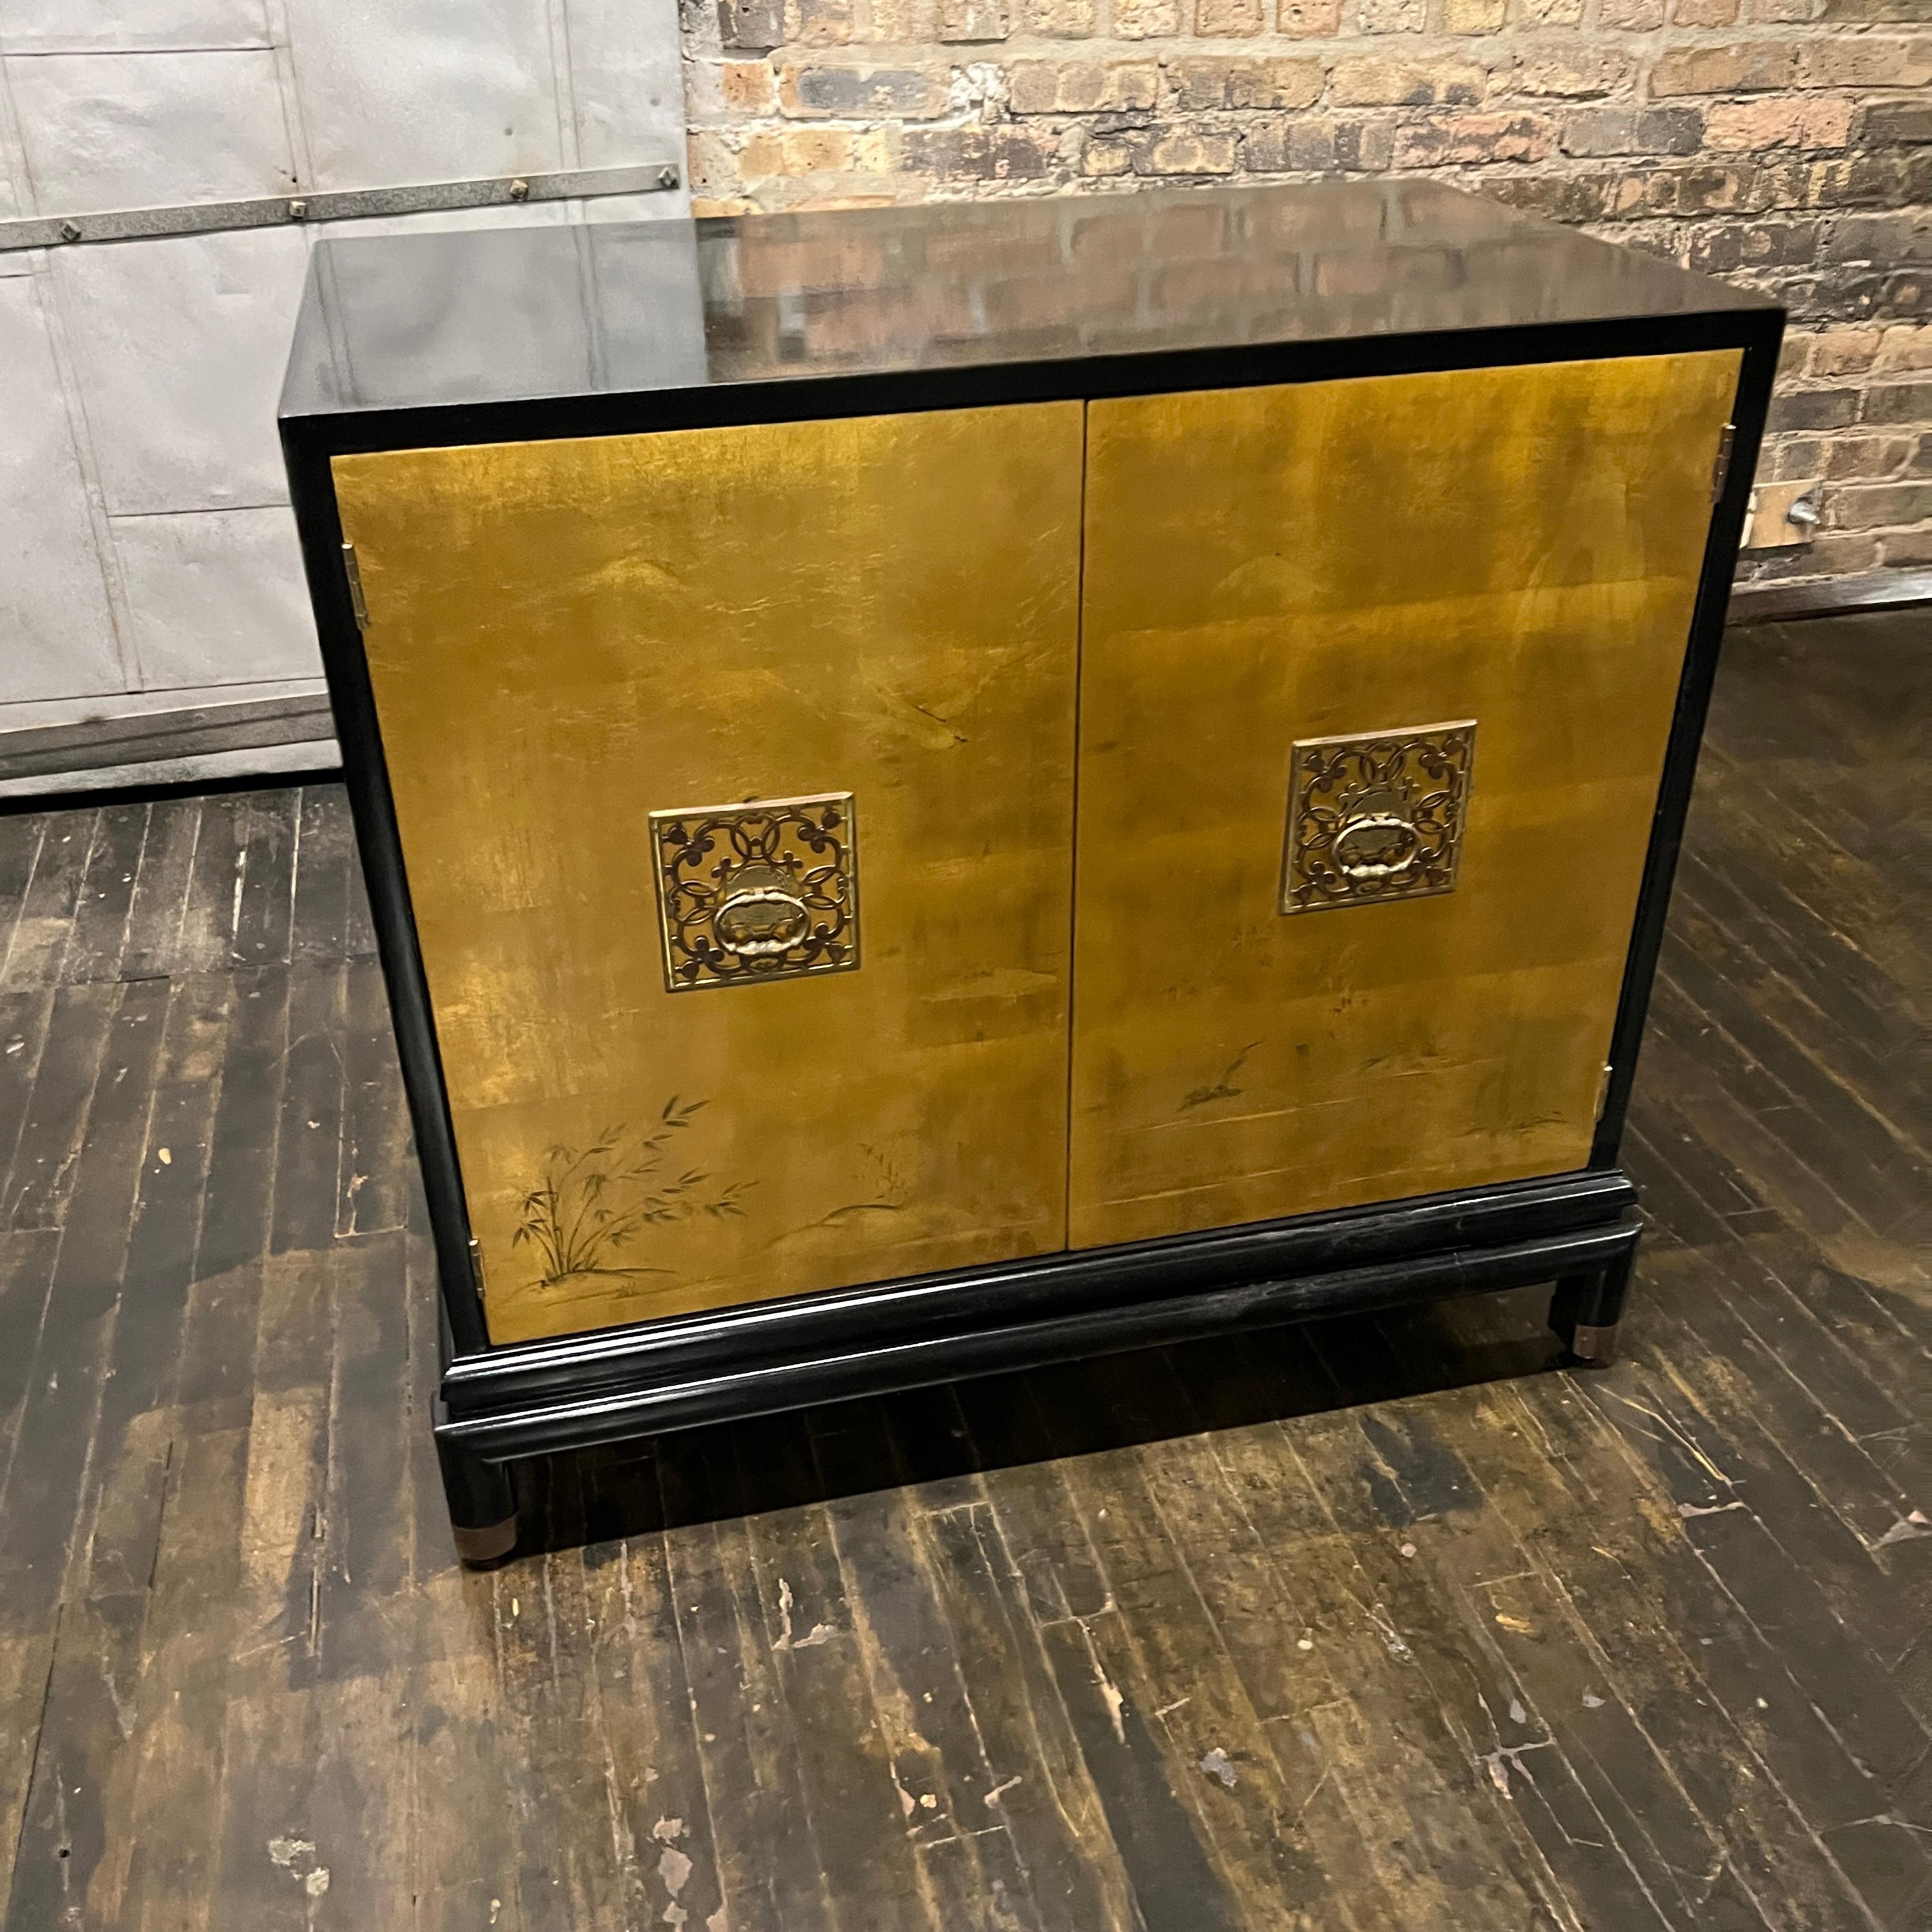 This is a stunning Chinoiserie style black lacquer cabinet with gilded (golden) doors that have images of birds, mountains and grasses painted in the gilding. There are two decorative brass door pulls. Cabinet opens to reveal one adjustable shelf.